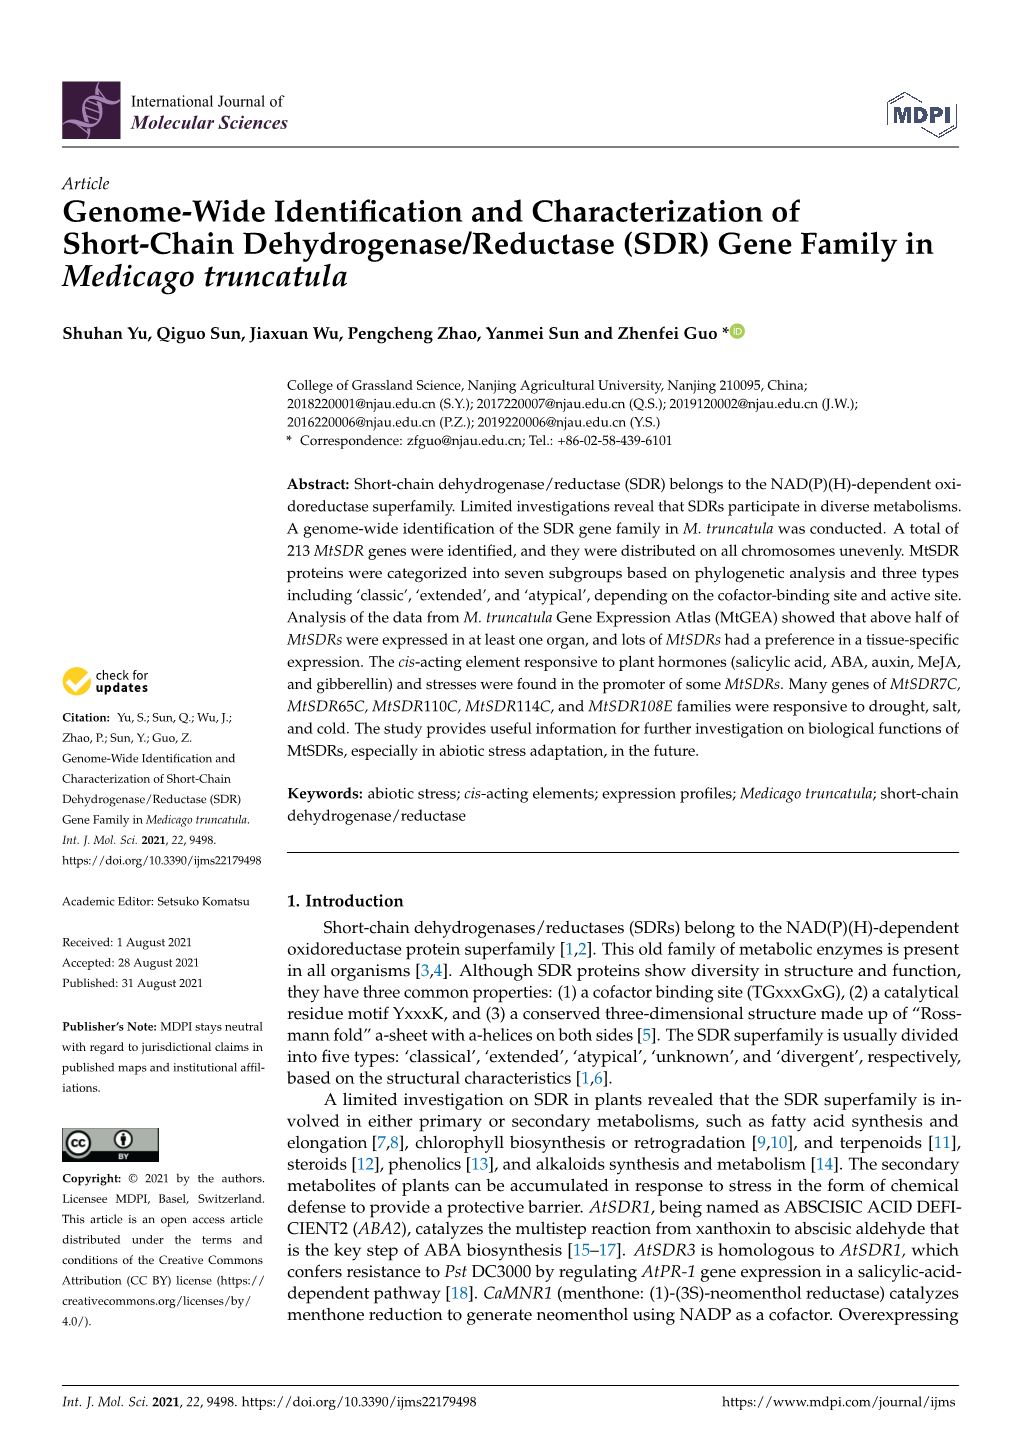 Genome-Wide Identification and Characterization of Short-Chain Dehydrogenase/Reductase (SDR) Gene Family in Medicago Truncatul